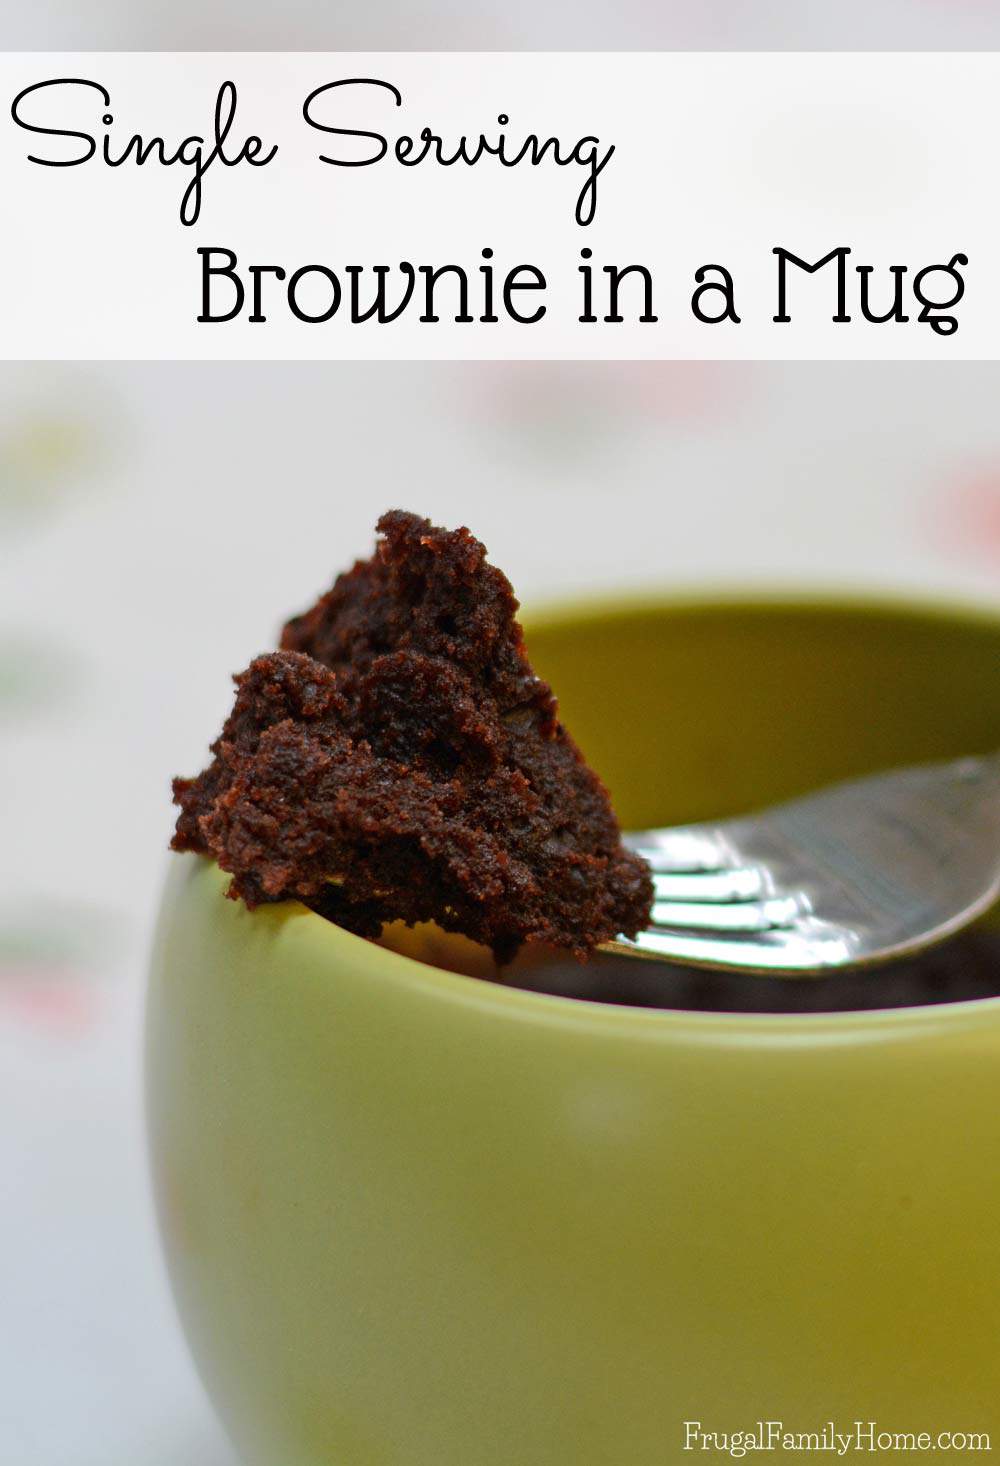 Easy to make mug recipe for brownies. So good and portioned controlled too.